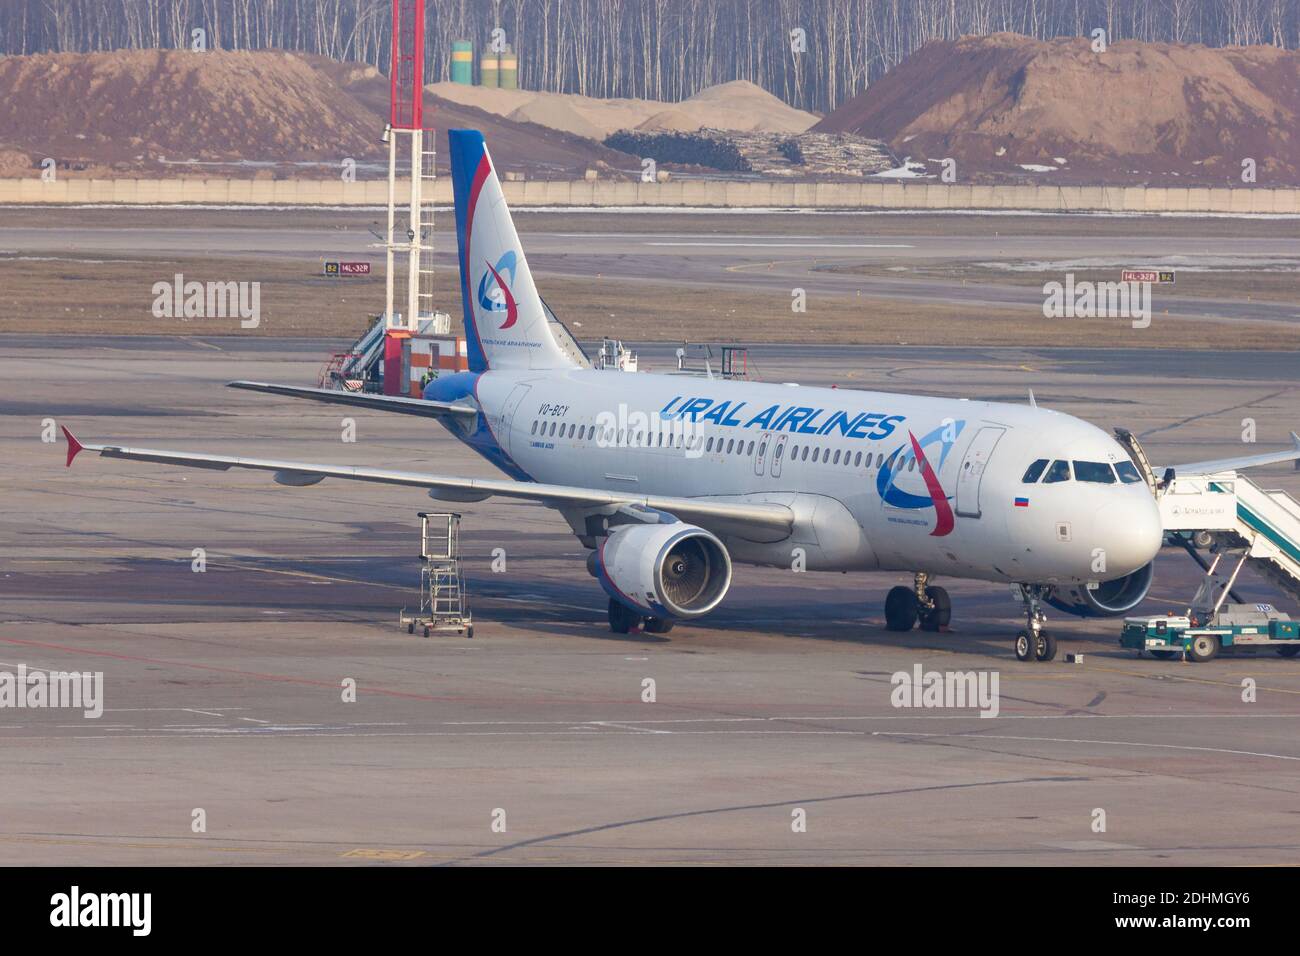 Moscow / Russia - 21.07.2015: Several airliner operators fly to Moscow's Domododevo Airport, one of the biggest airports of Moscow. Stock Photo